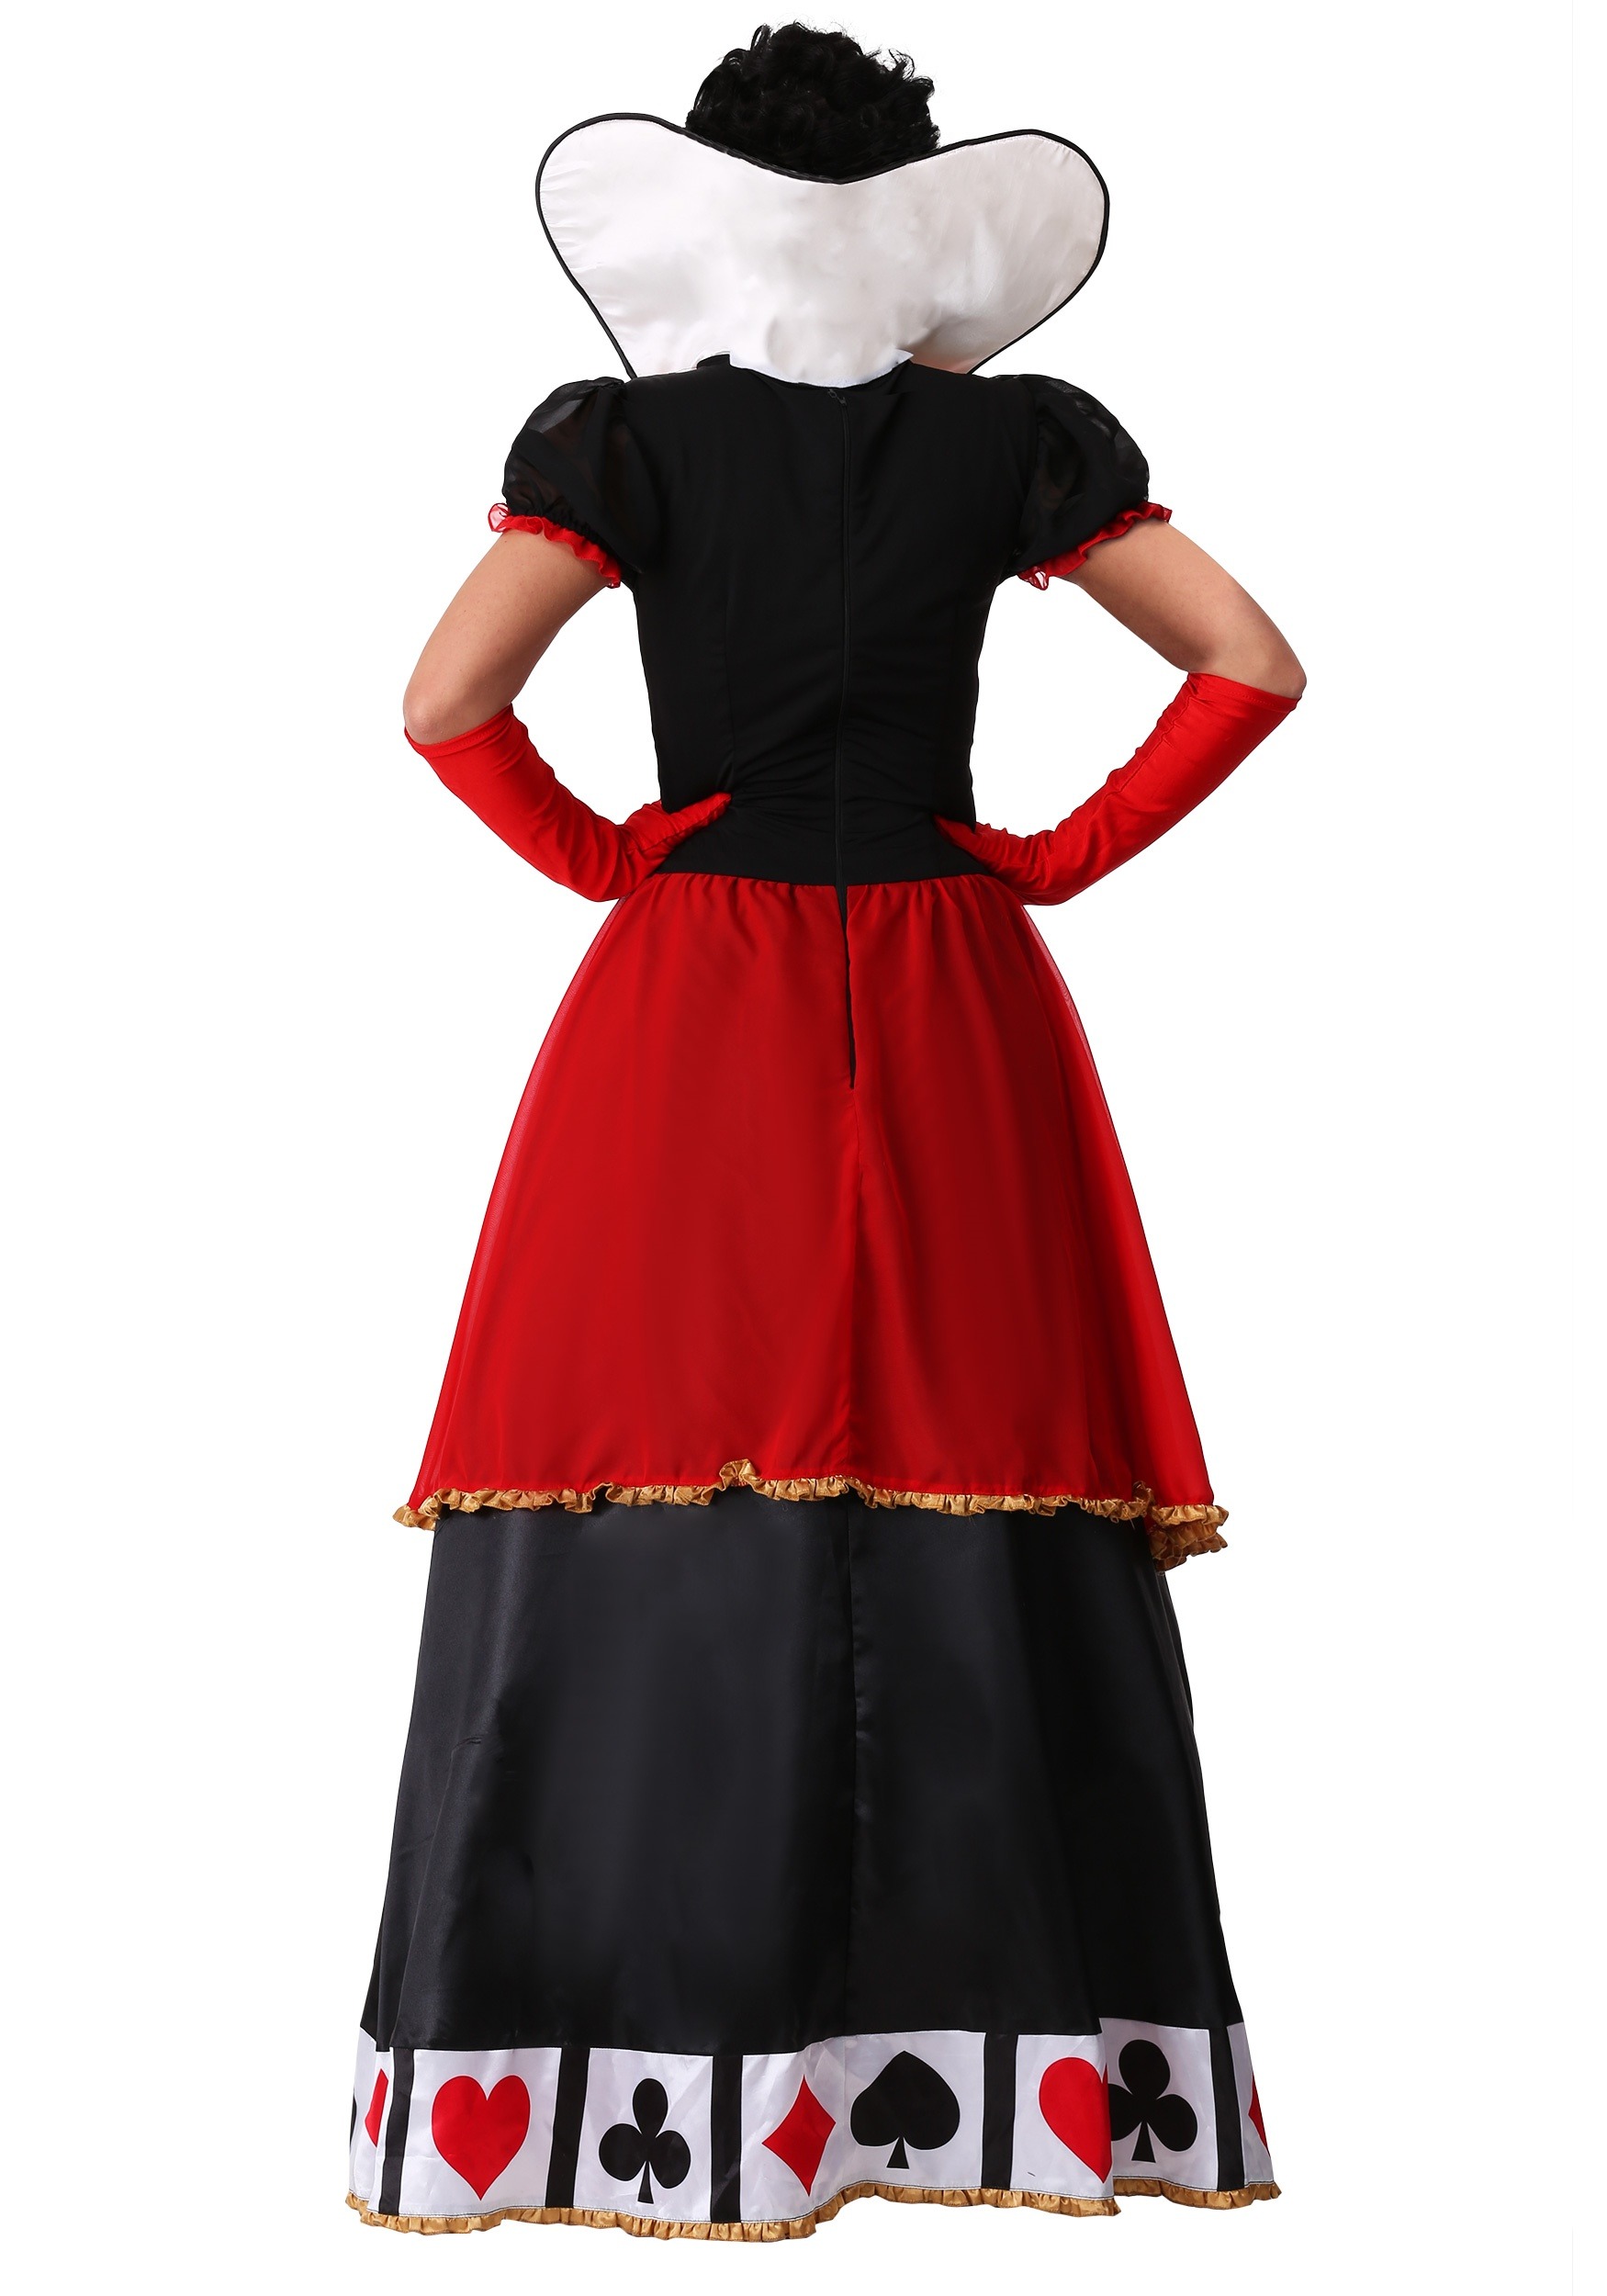 Supreme Queen of Hearts Costume for Plus Size Women